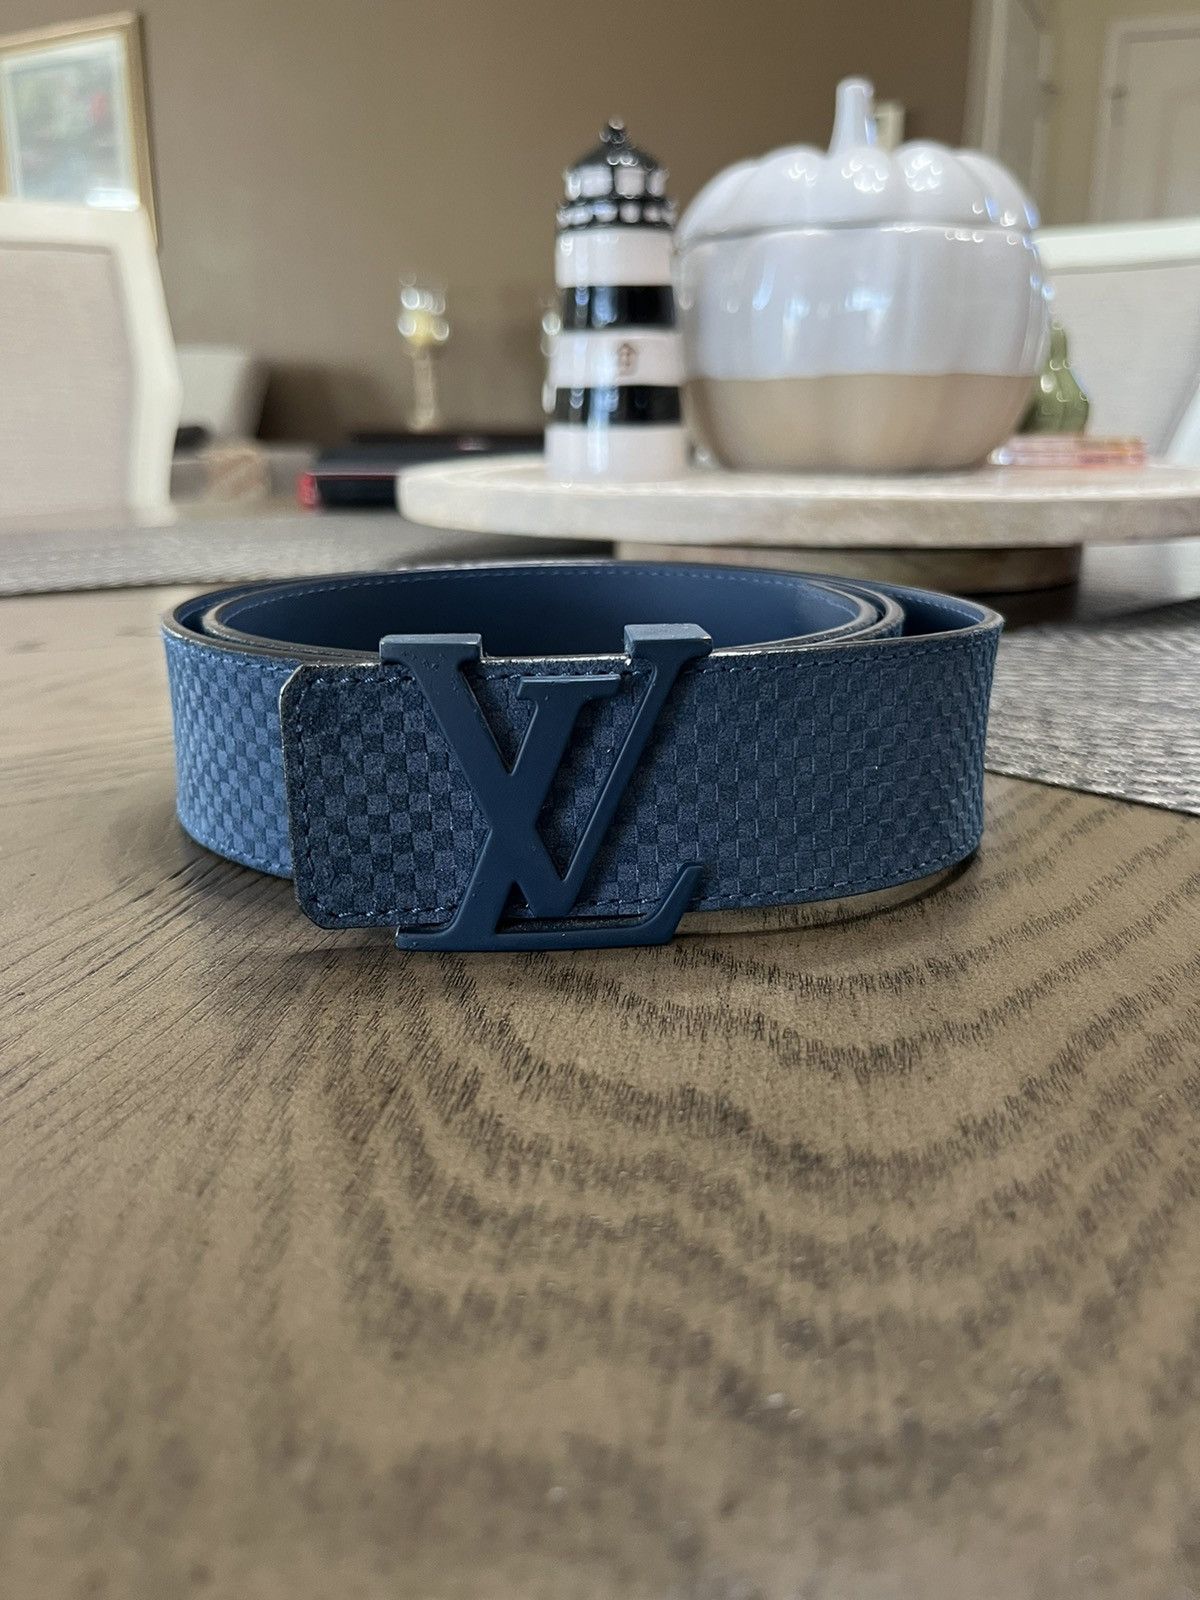 Damier LV 40MM Reversible Belt Other Leathers - Accessories M0333S